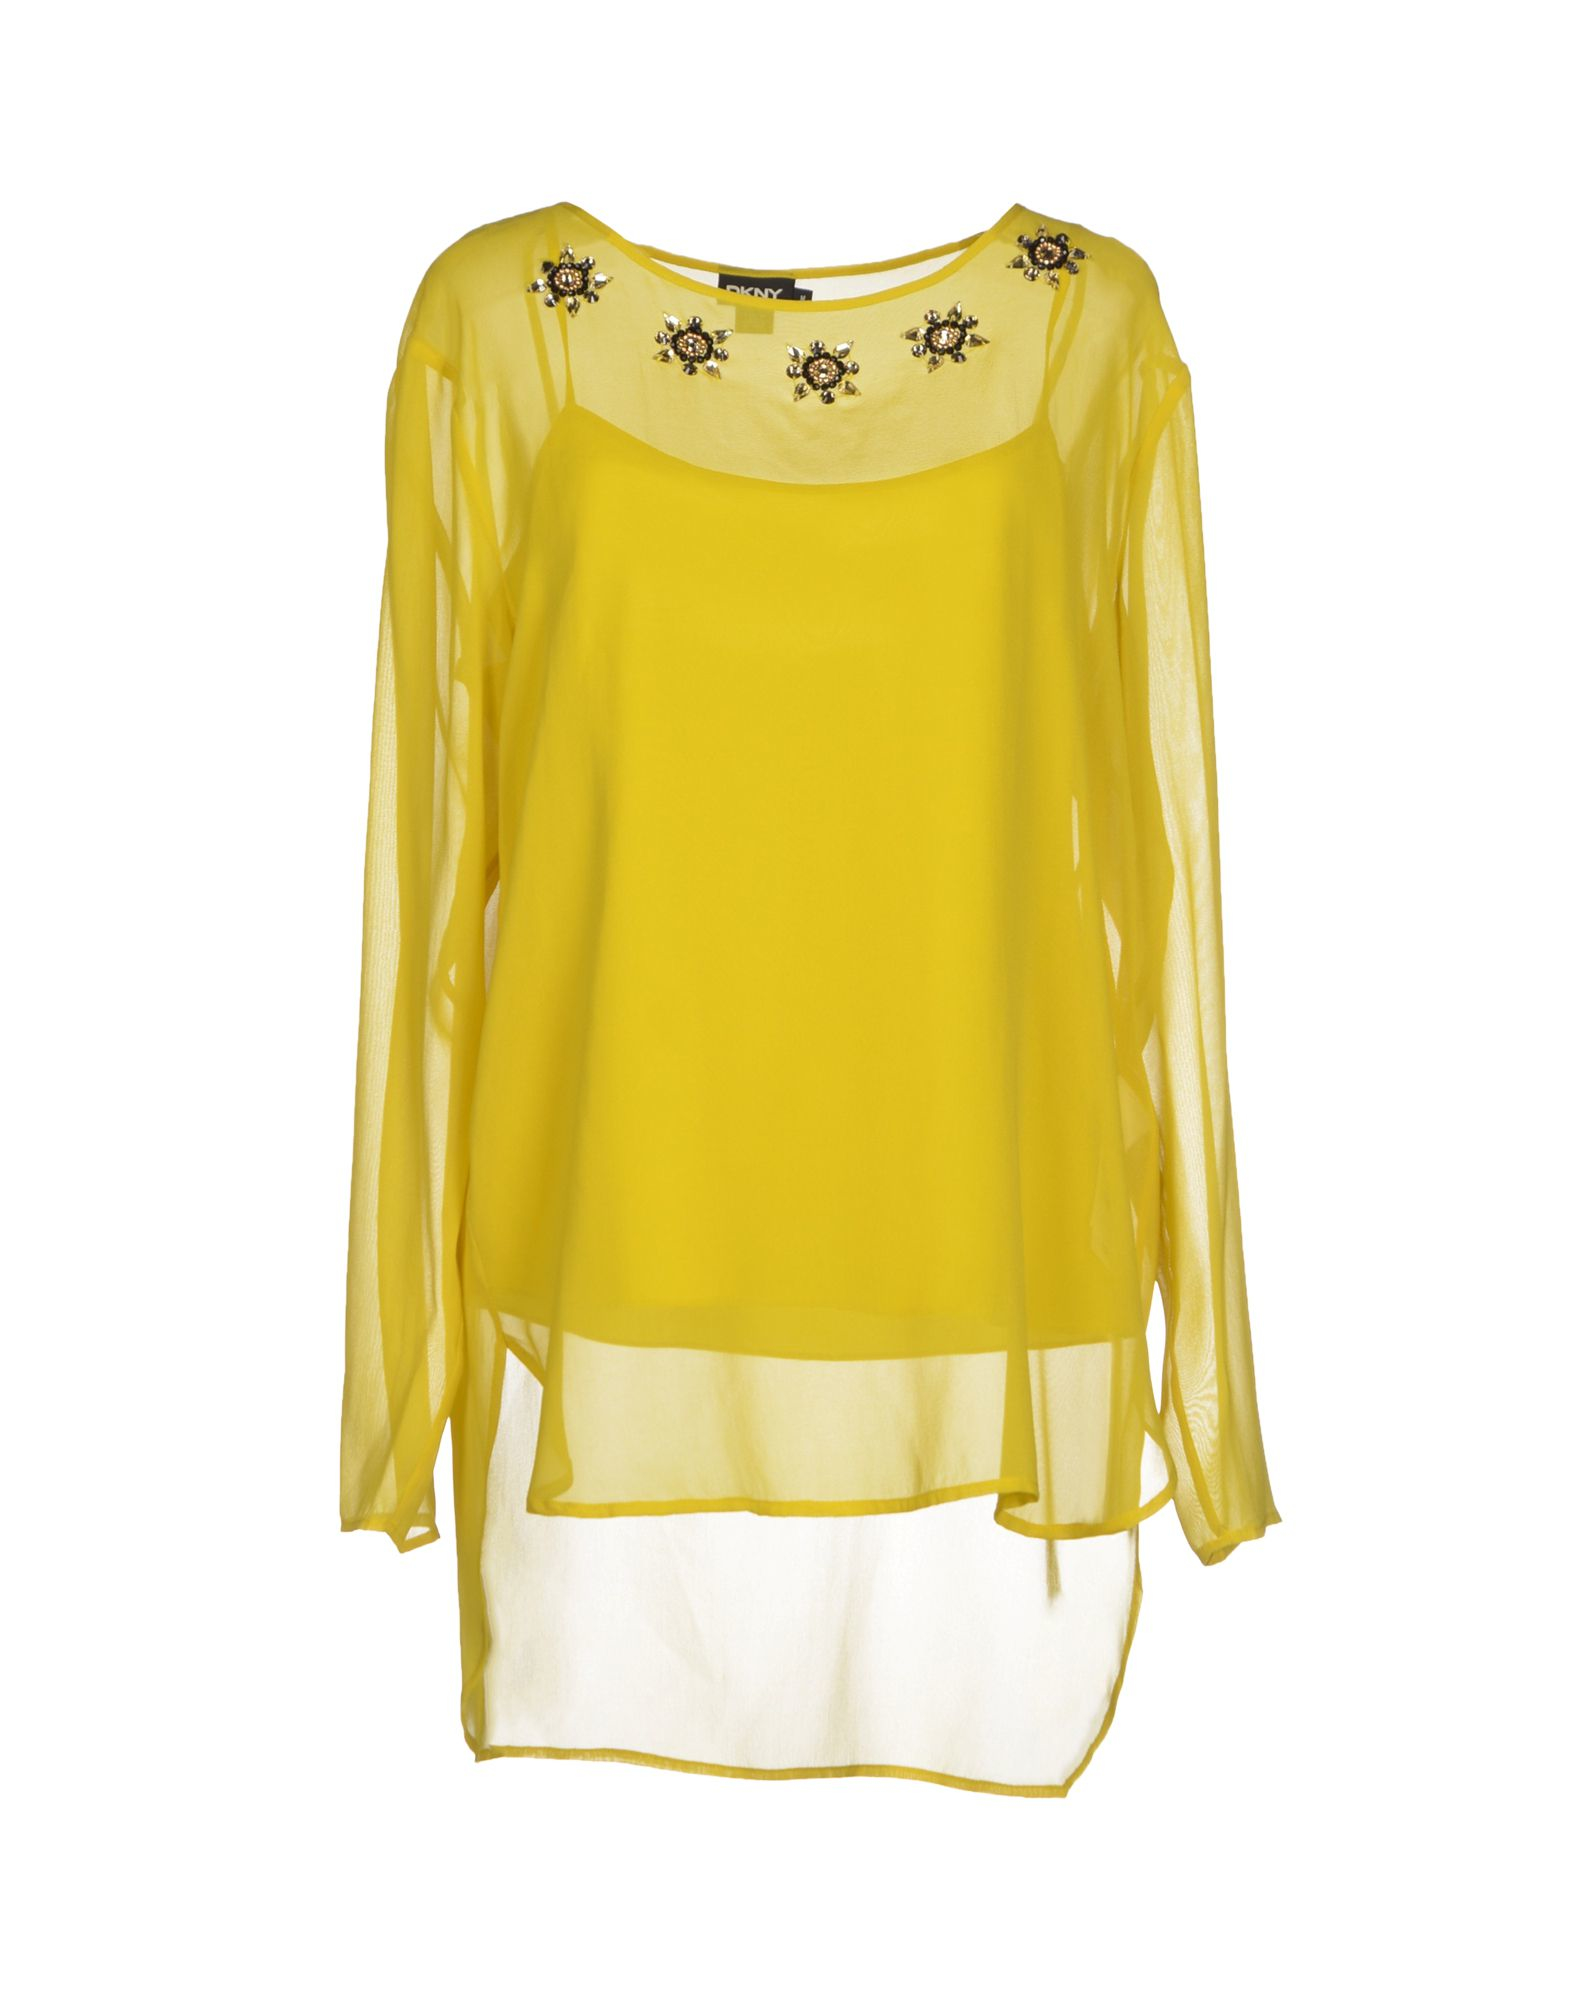 Lyst - DKNY Blouse in Yellow